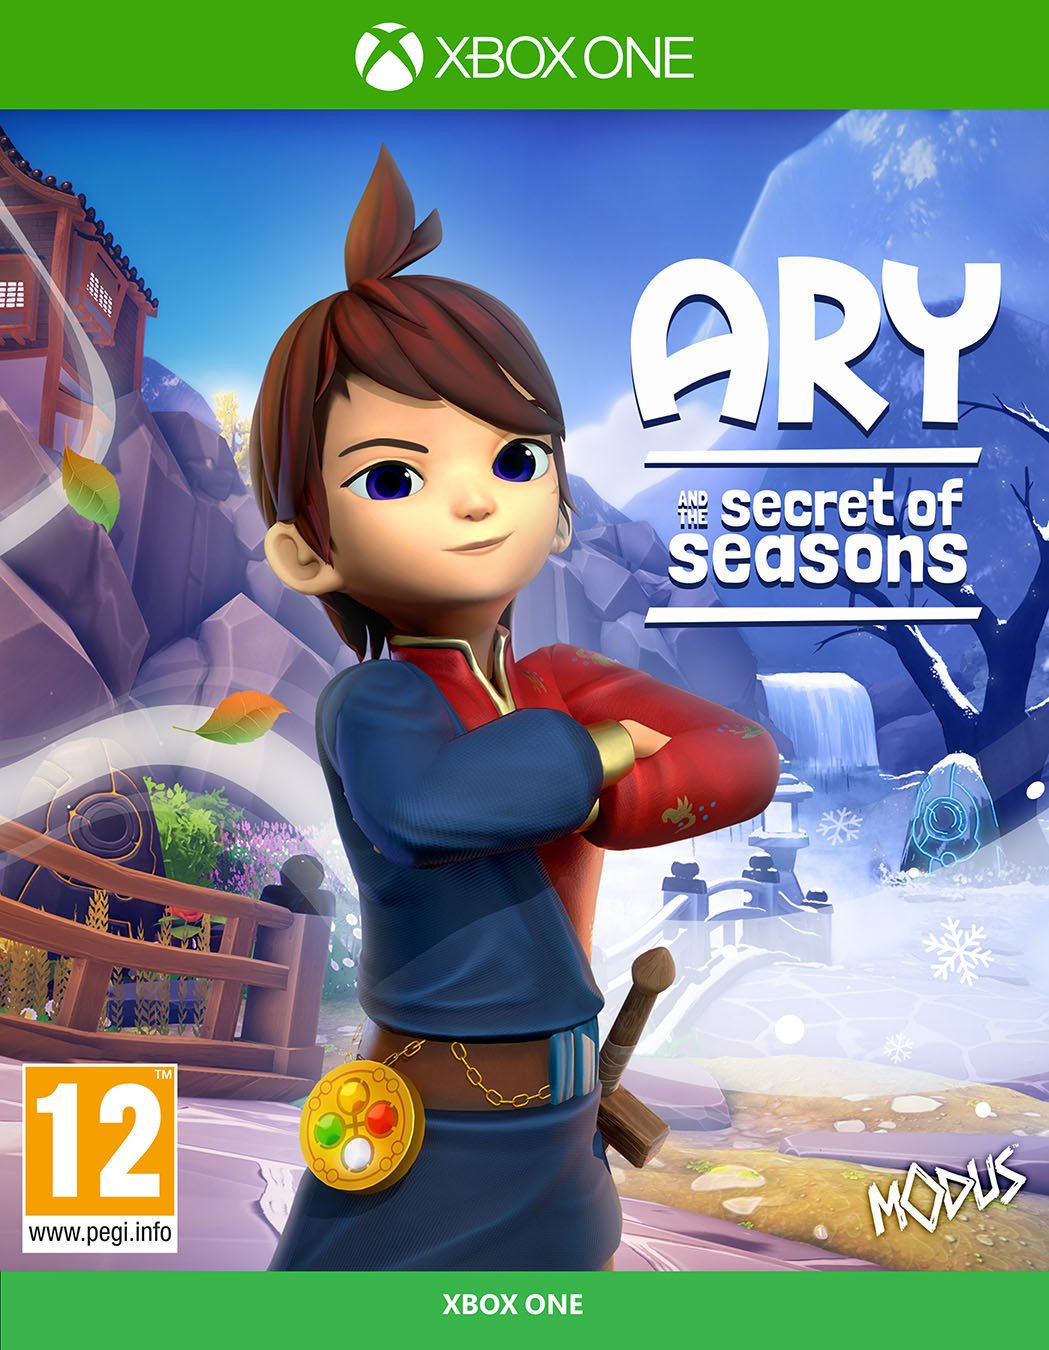 Ary and the Secret of Seasons Xbox One Pre-Order Game